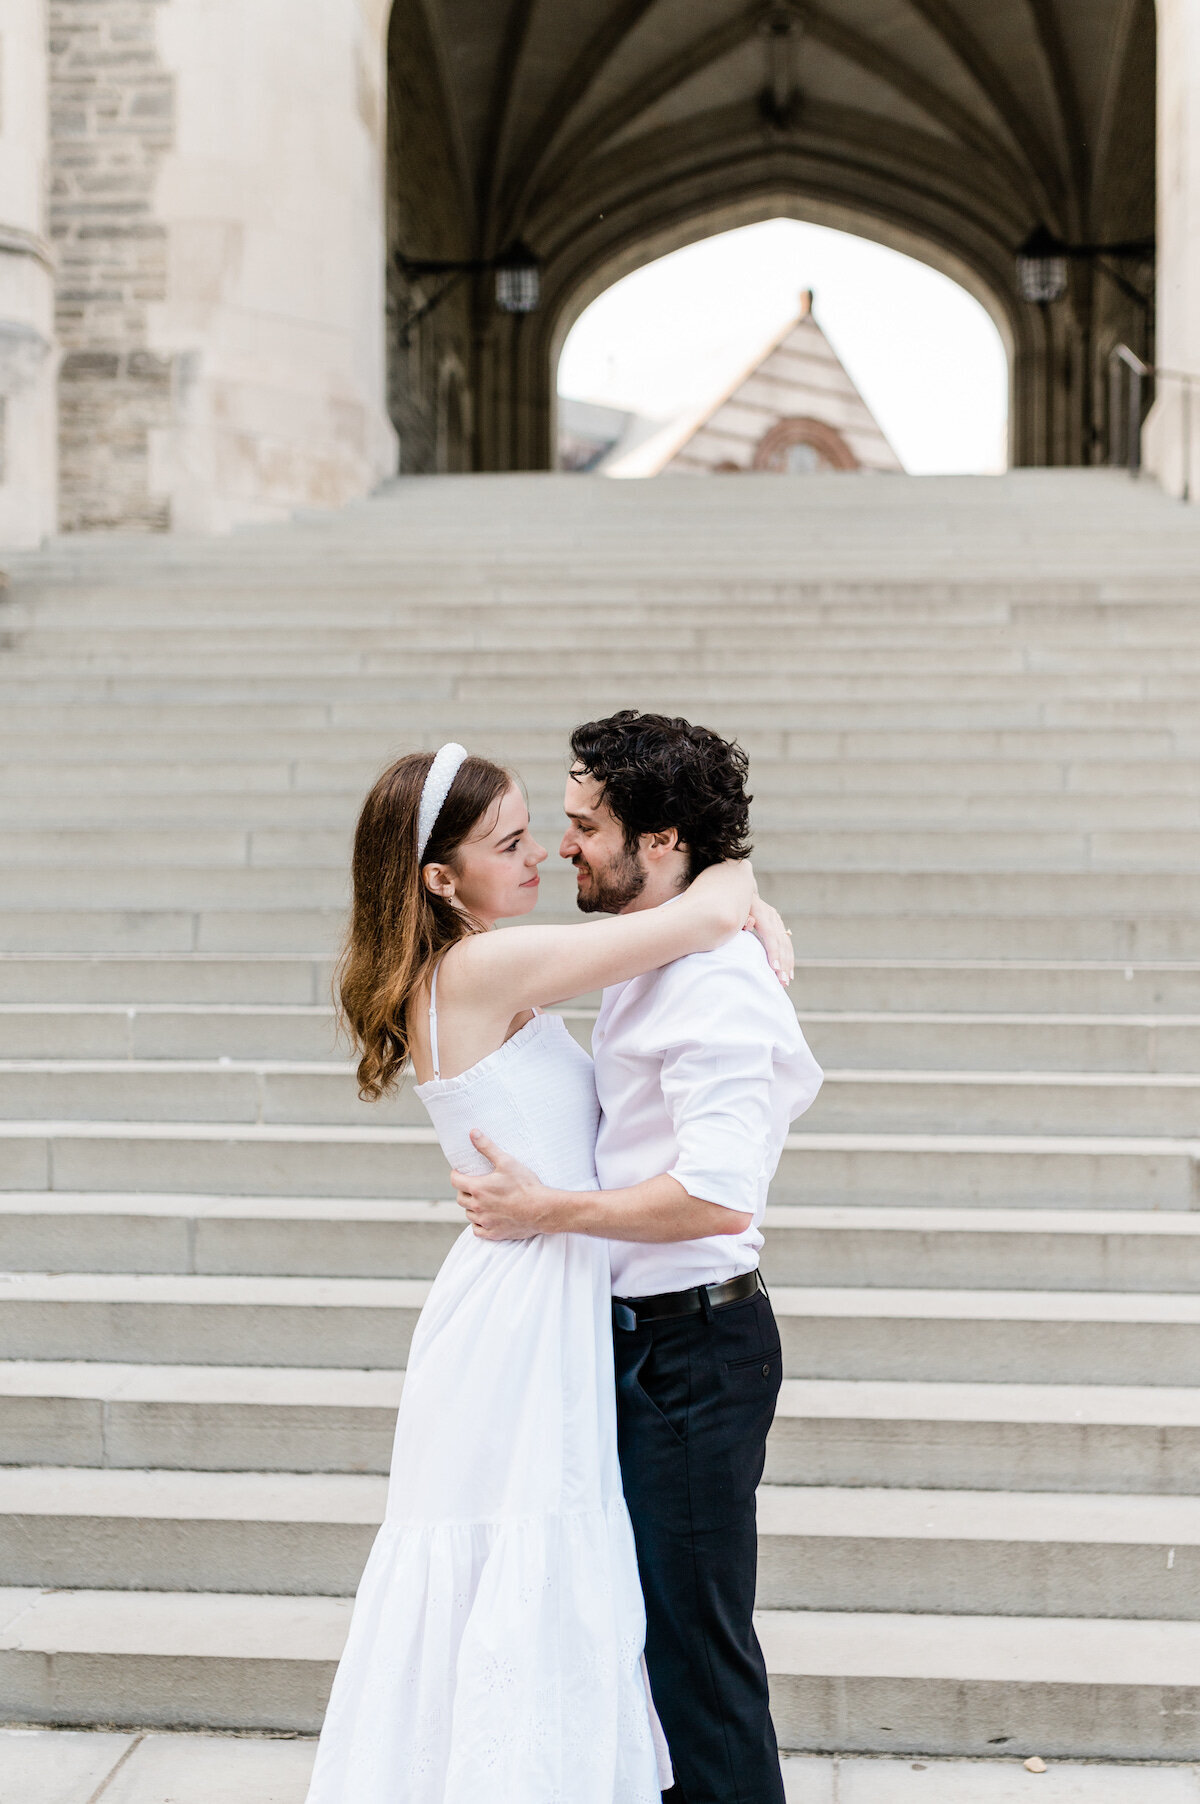 Elevate your engagement memories with the artful touch of our luxury sessions. Our editorial aesthetic transforms your love story into a visual narrative, highlighting both genuine emotions and curated elegance.